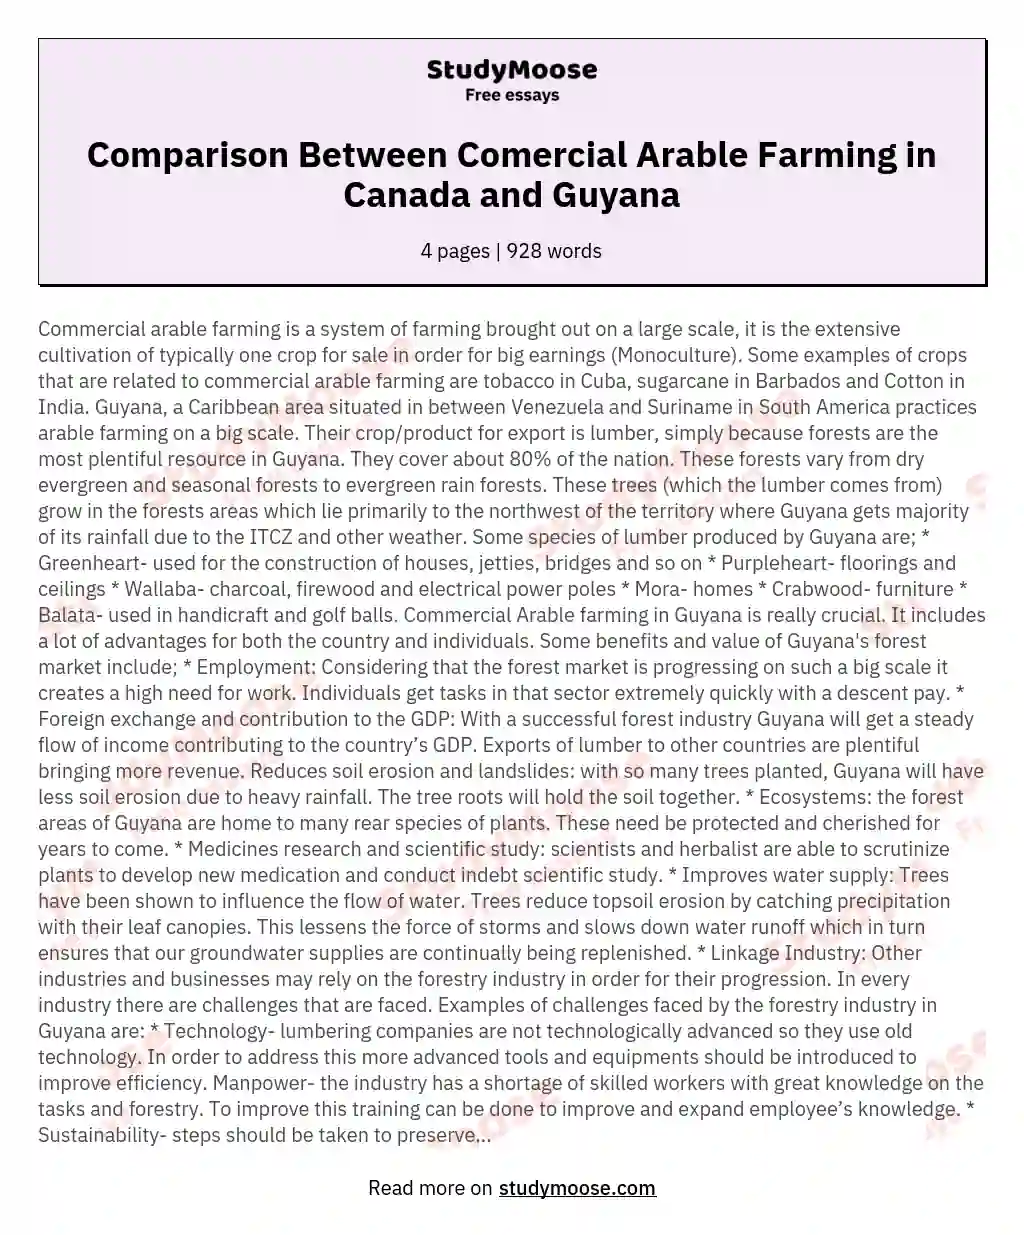 Comparison Between Comercial Arable Farming in Canada and Guyana